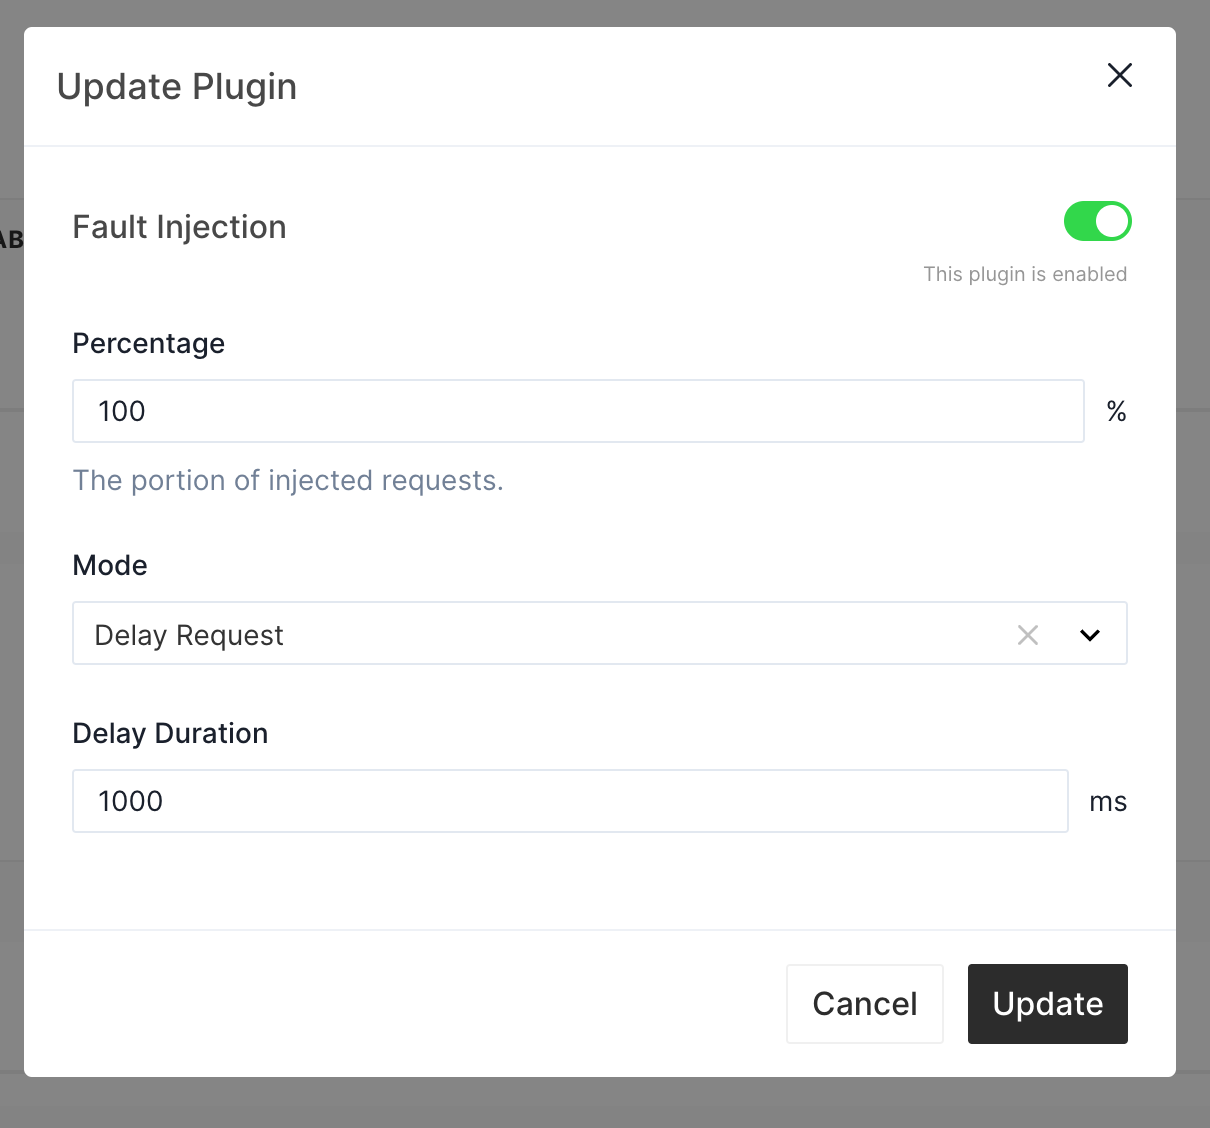 Update Fault Injection Plugin